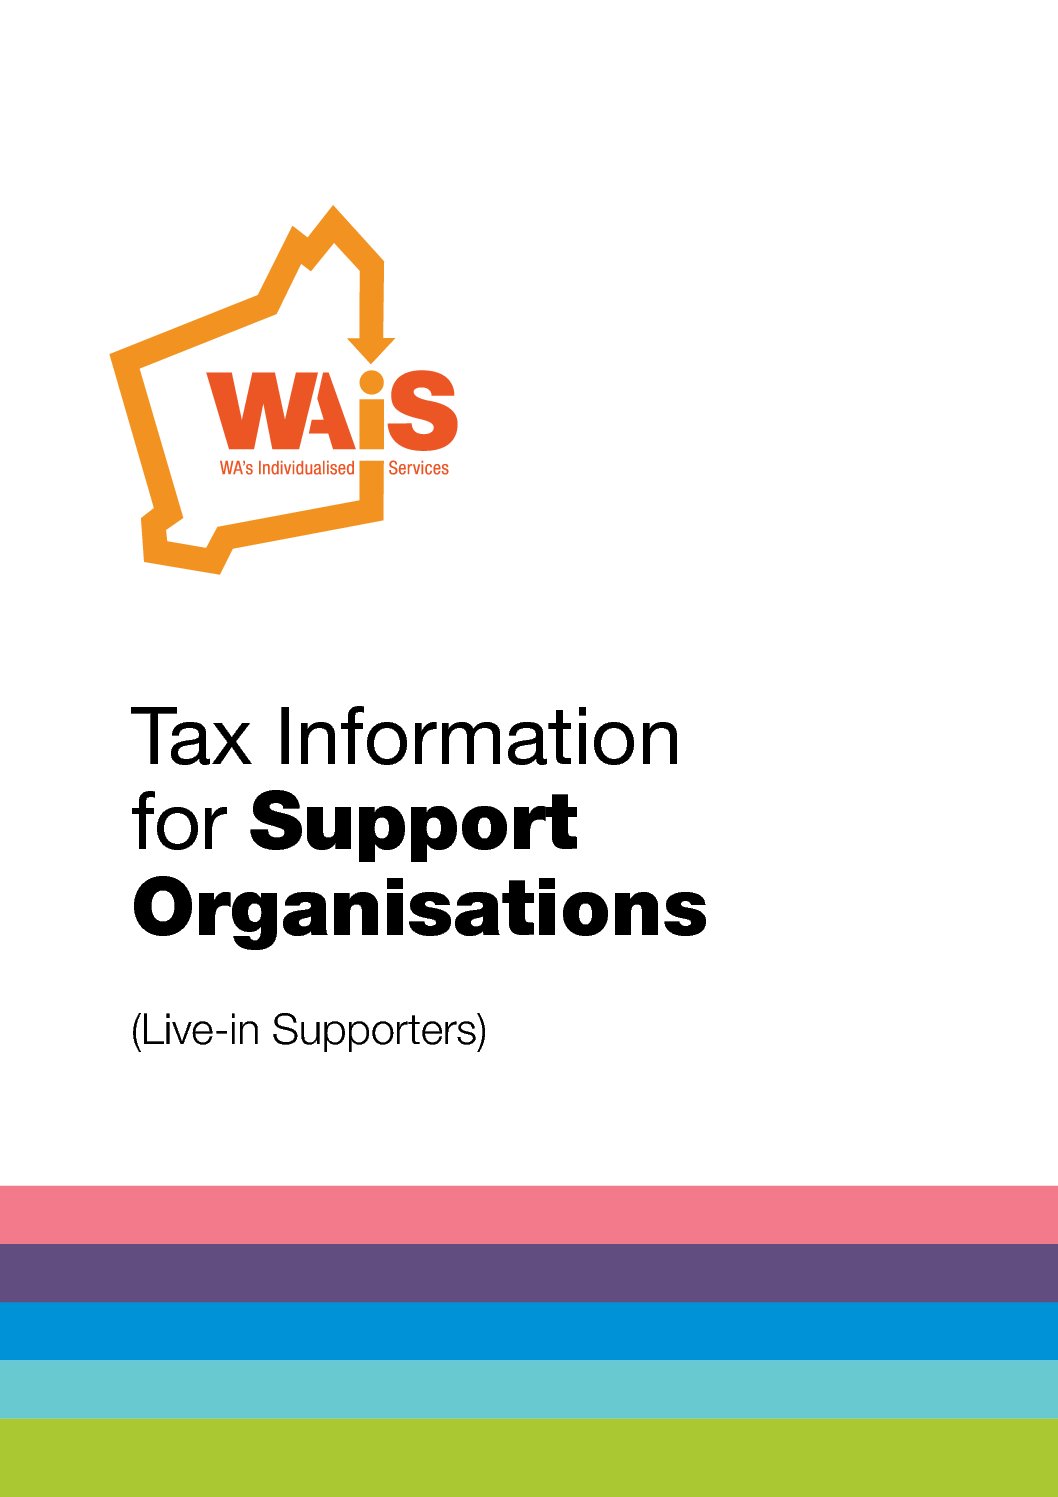 Tax Information for Support Organisations (Live in Supporters)